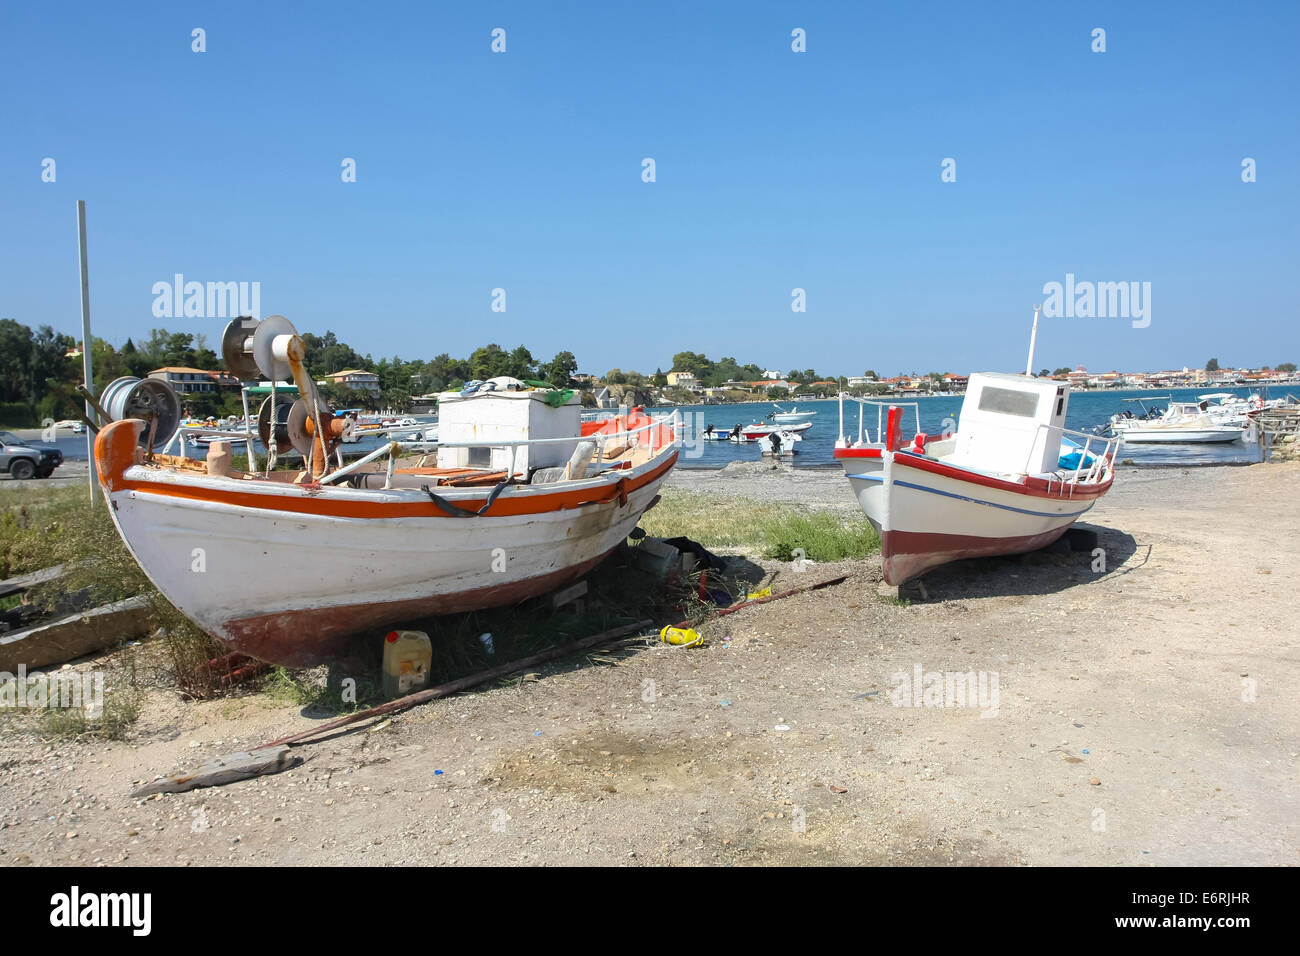 Two boats on a dry dock on a coast of Laganas resort in Zakynthos ...